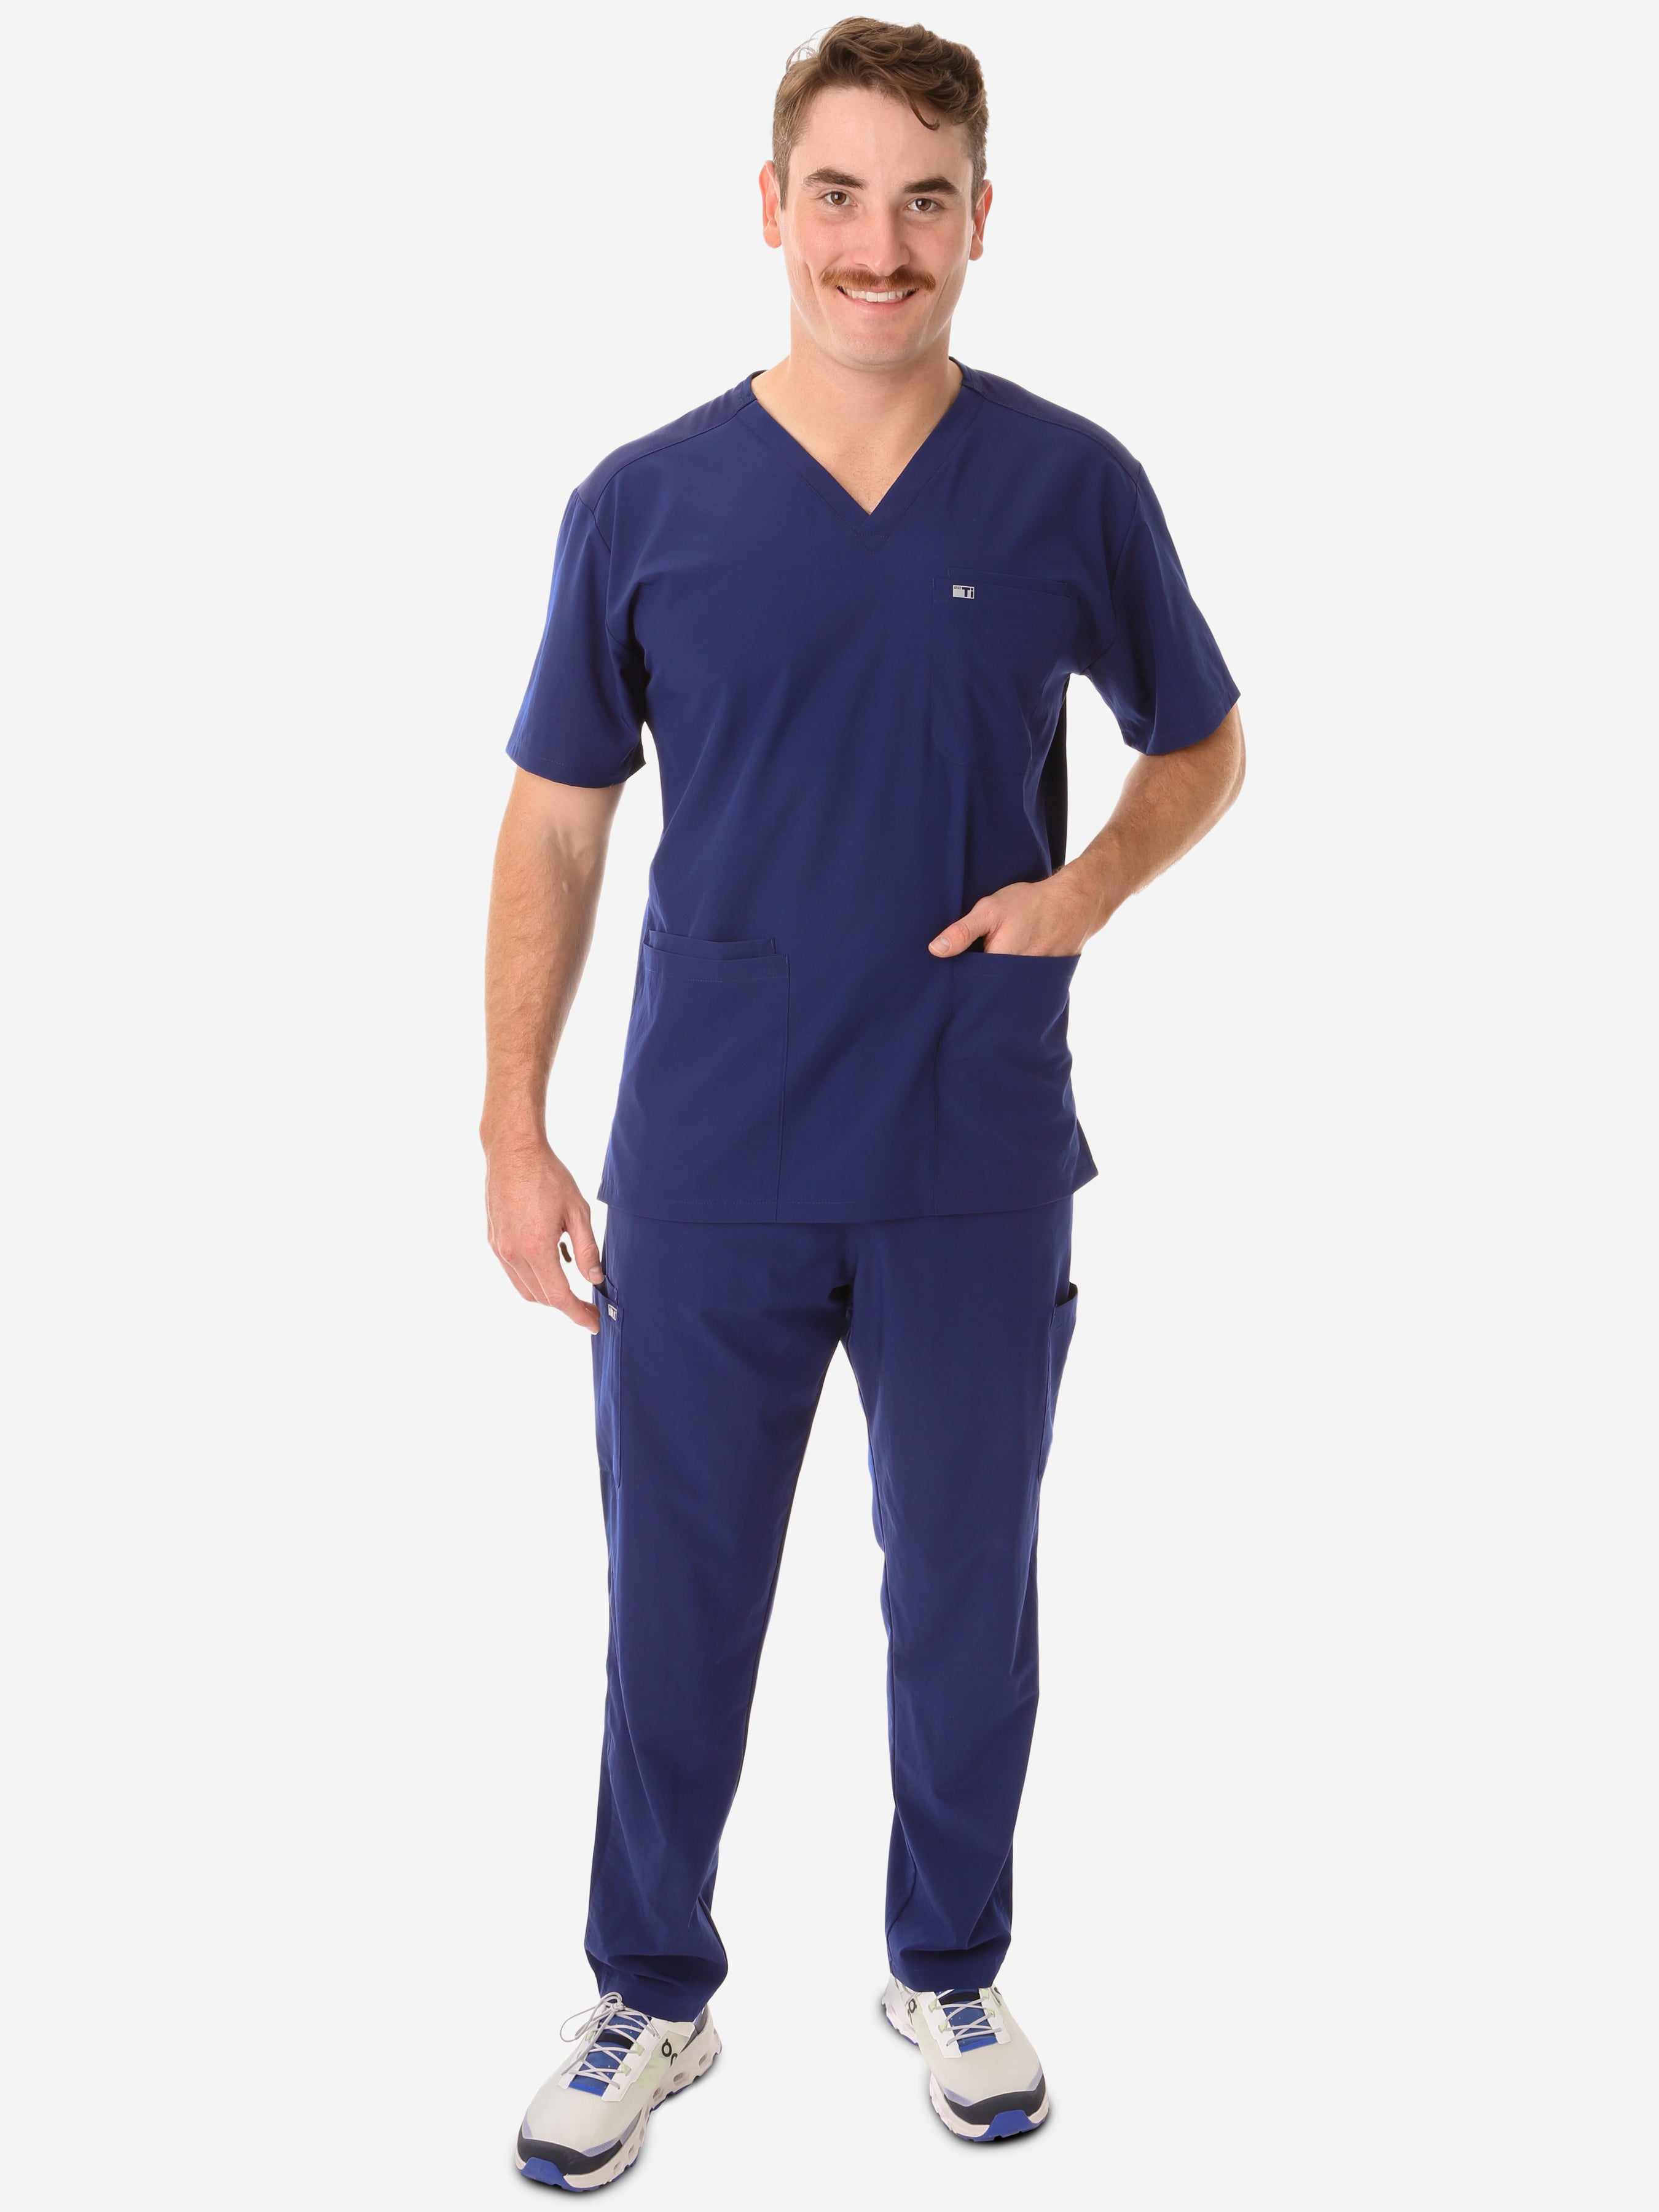 Men&#39;s Navy Blue Five-Pocket Scrub Top Full Body Front View with 9-Pocket Pants